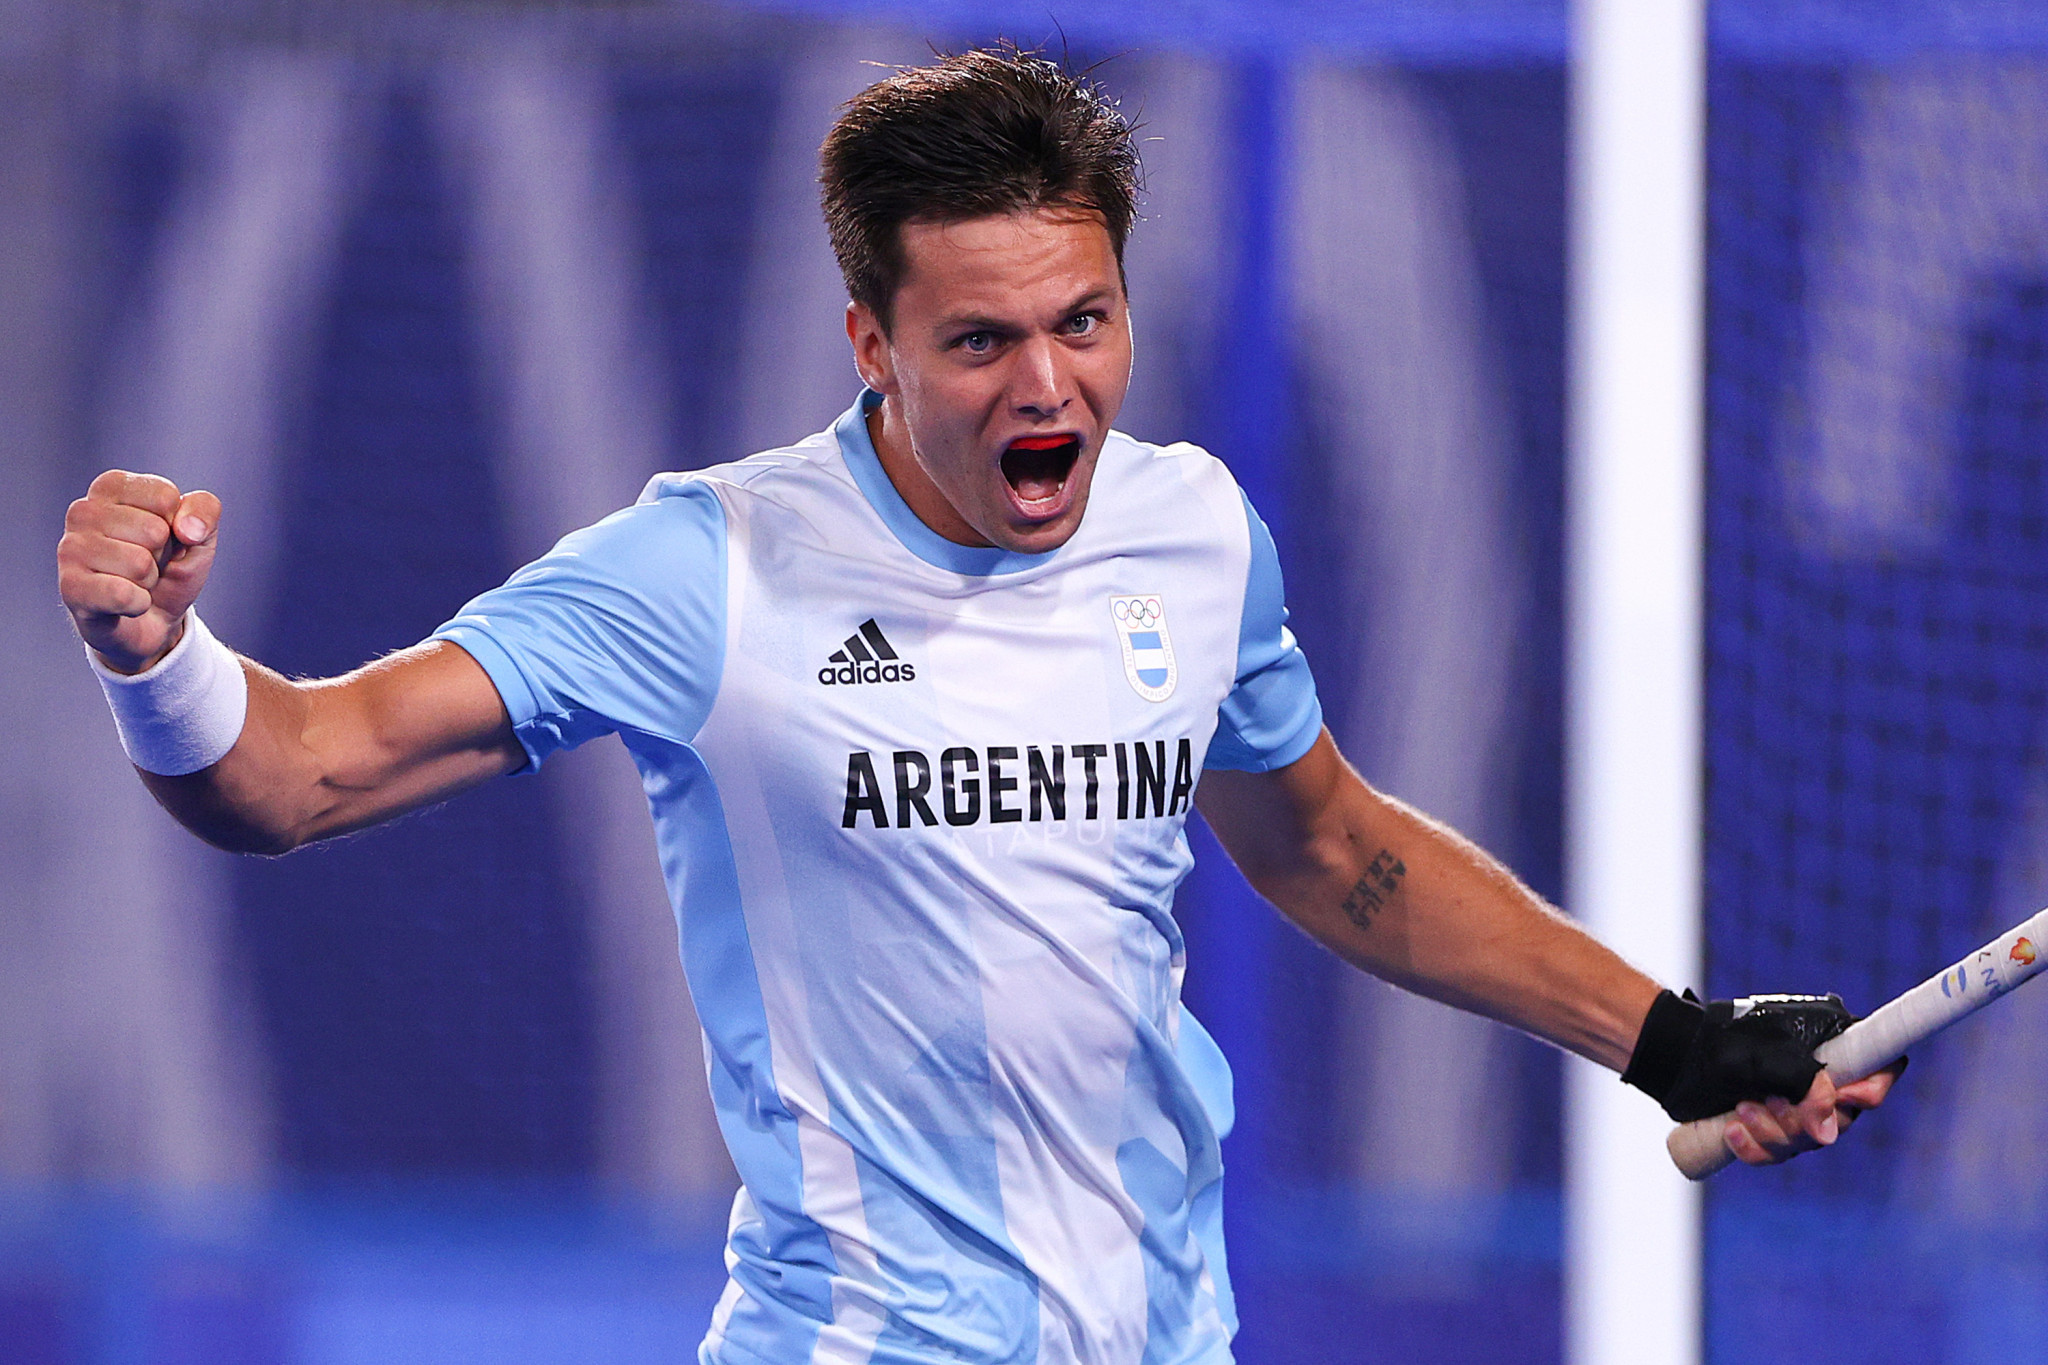 Nicolas Keenan scored Argentina's second goal of the match ©Getty Images